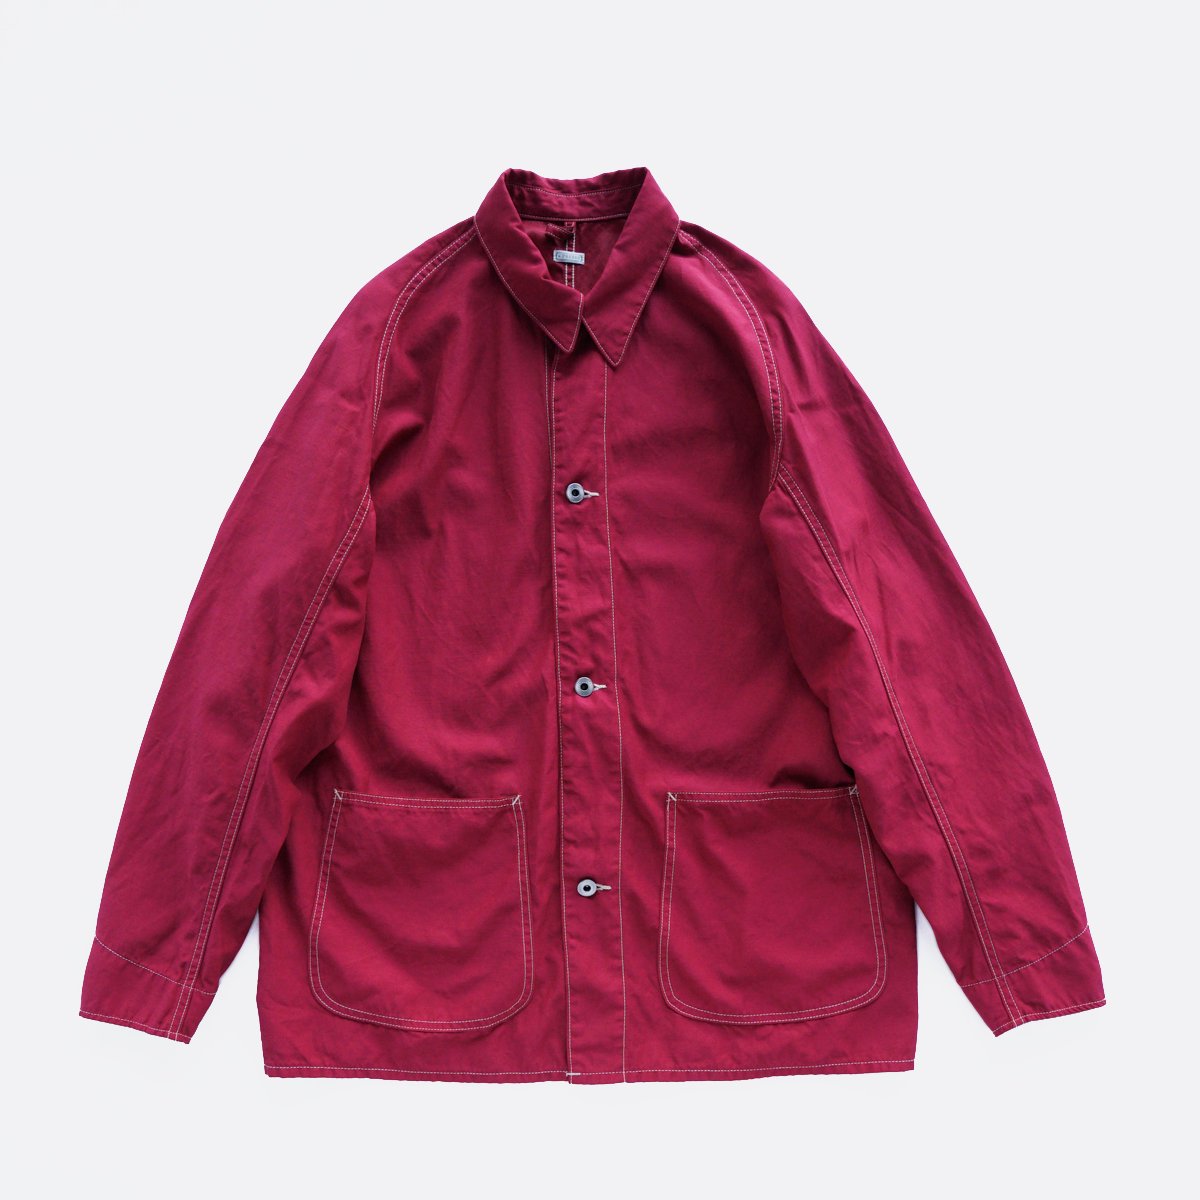 OVER DYEING COVERALL JACKET - 香川県高松市のセレクトショップ IHATOVE（イーハトーブ）  A.PRESSE,NEPENTHES,NICENESS,PORTER CLASSIC,WIRROWの通販